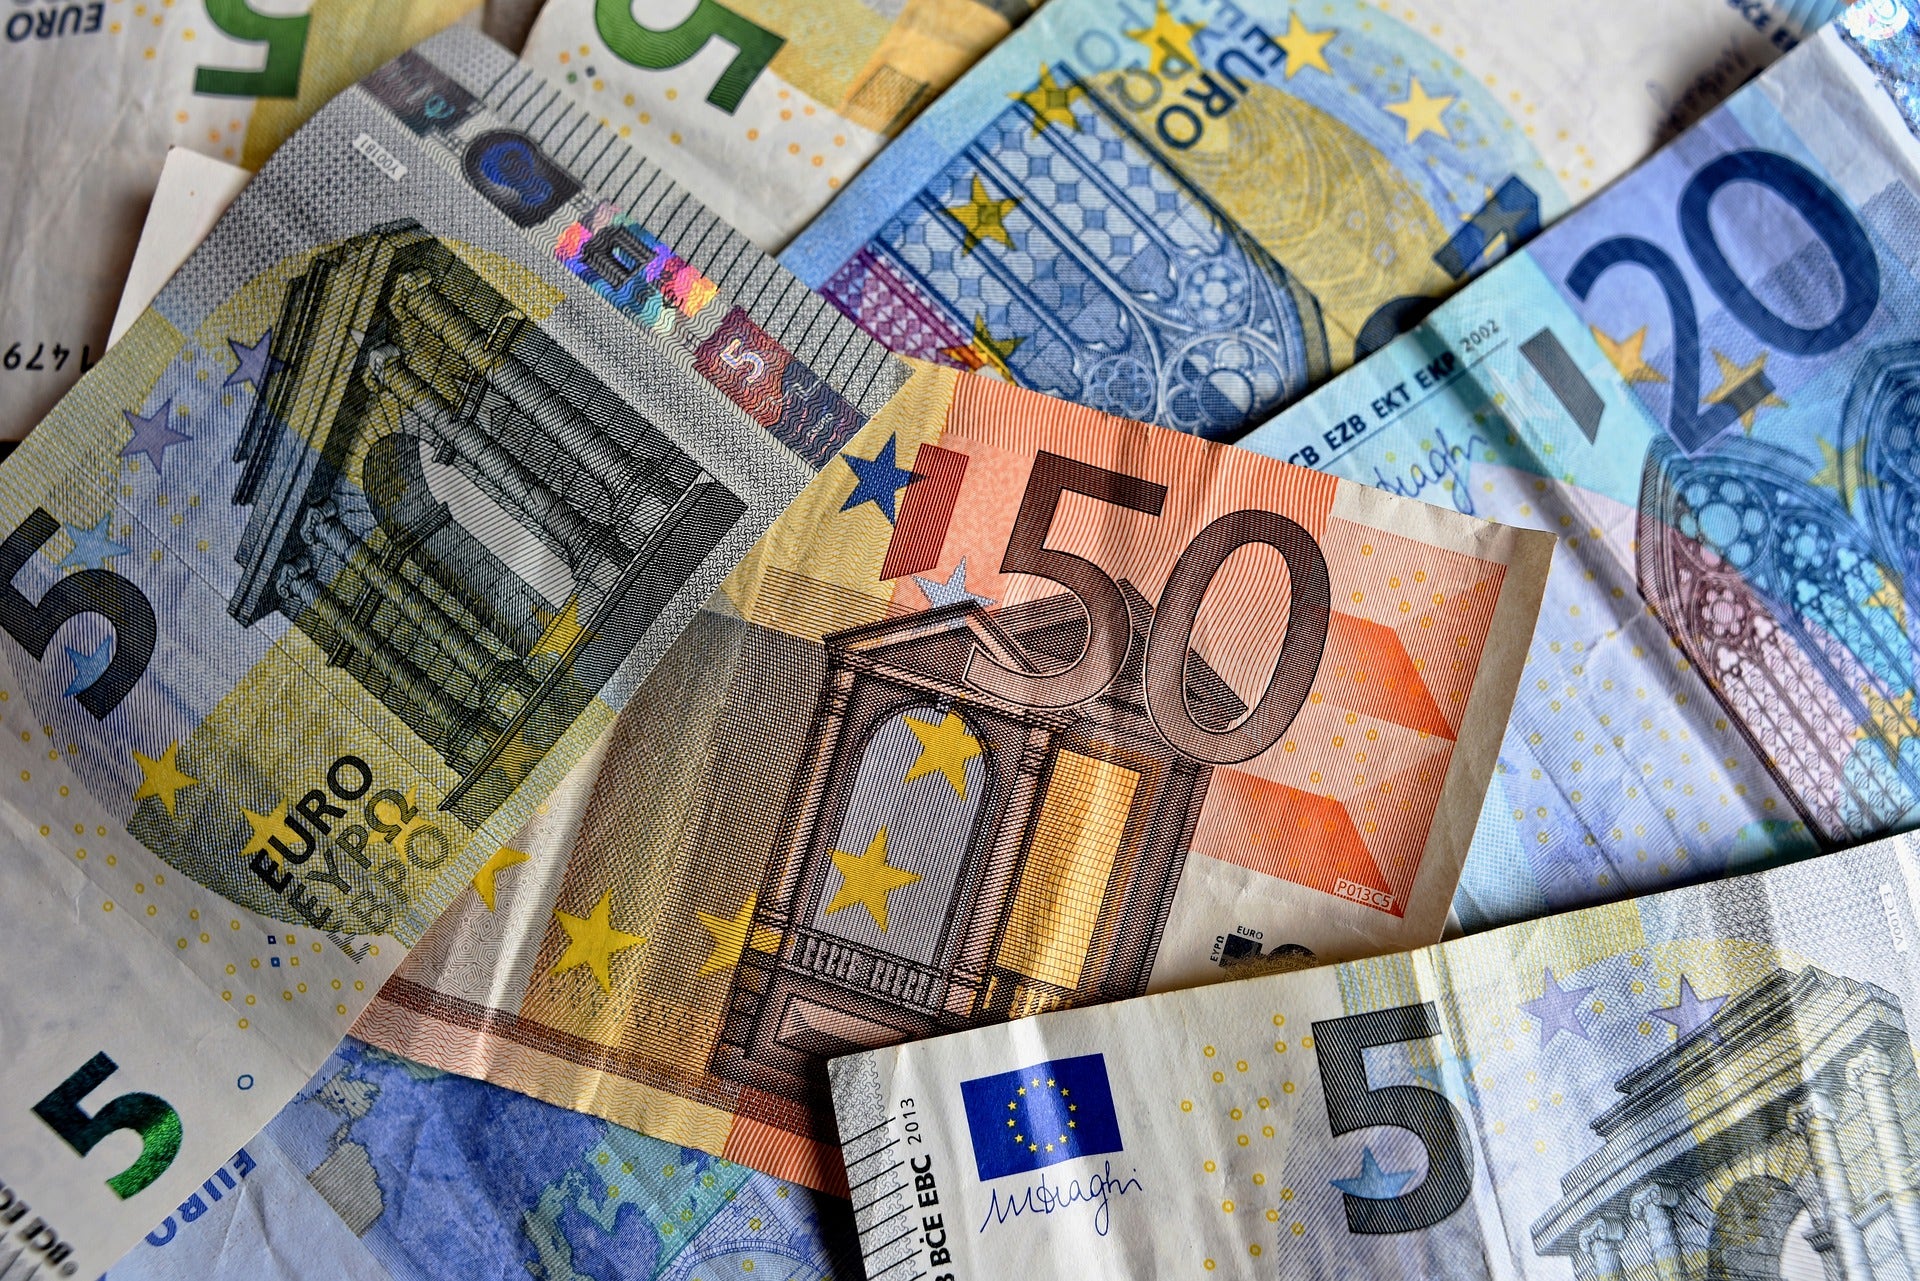 EUR/USD Has Slid Below the 1.1600 Level, Could Extend Its Slide to Fresh Yearly Lows